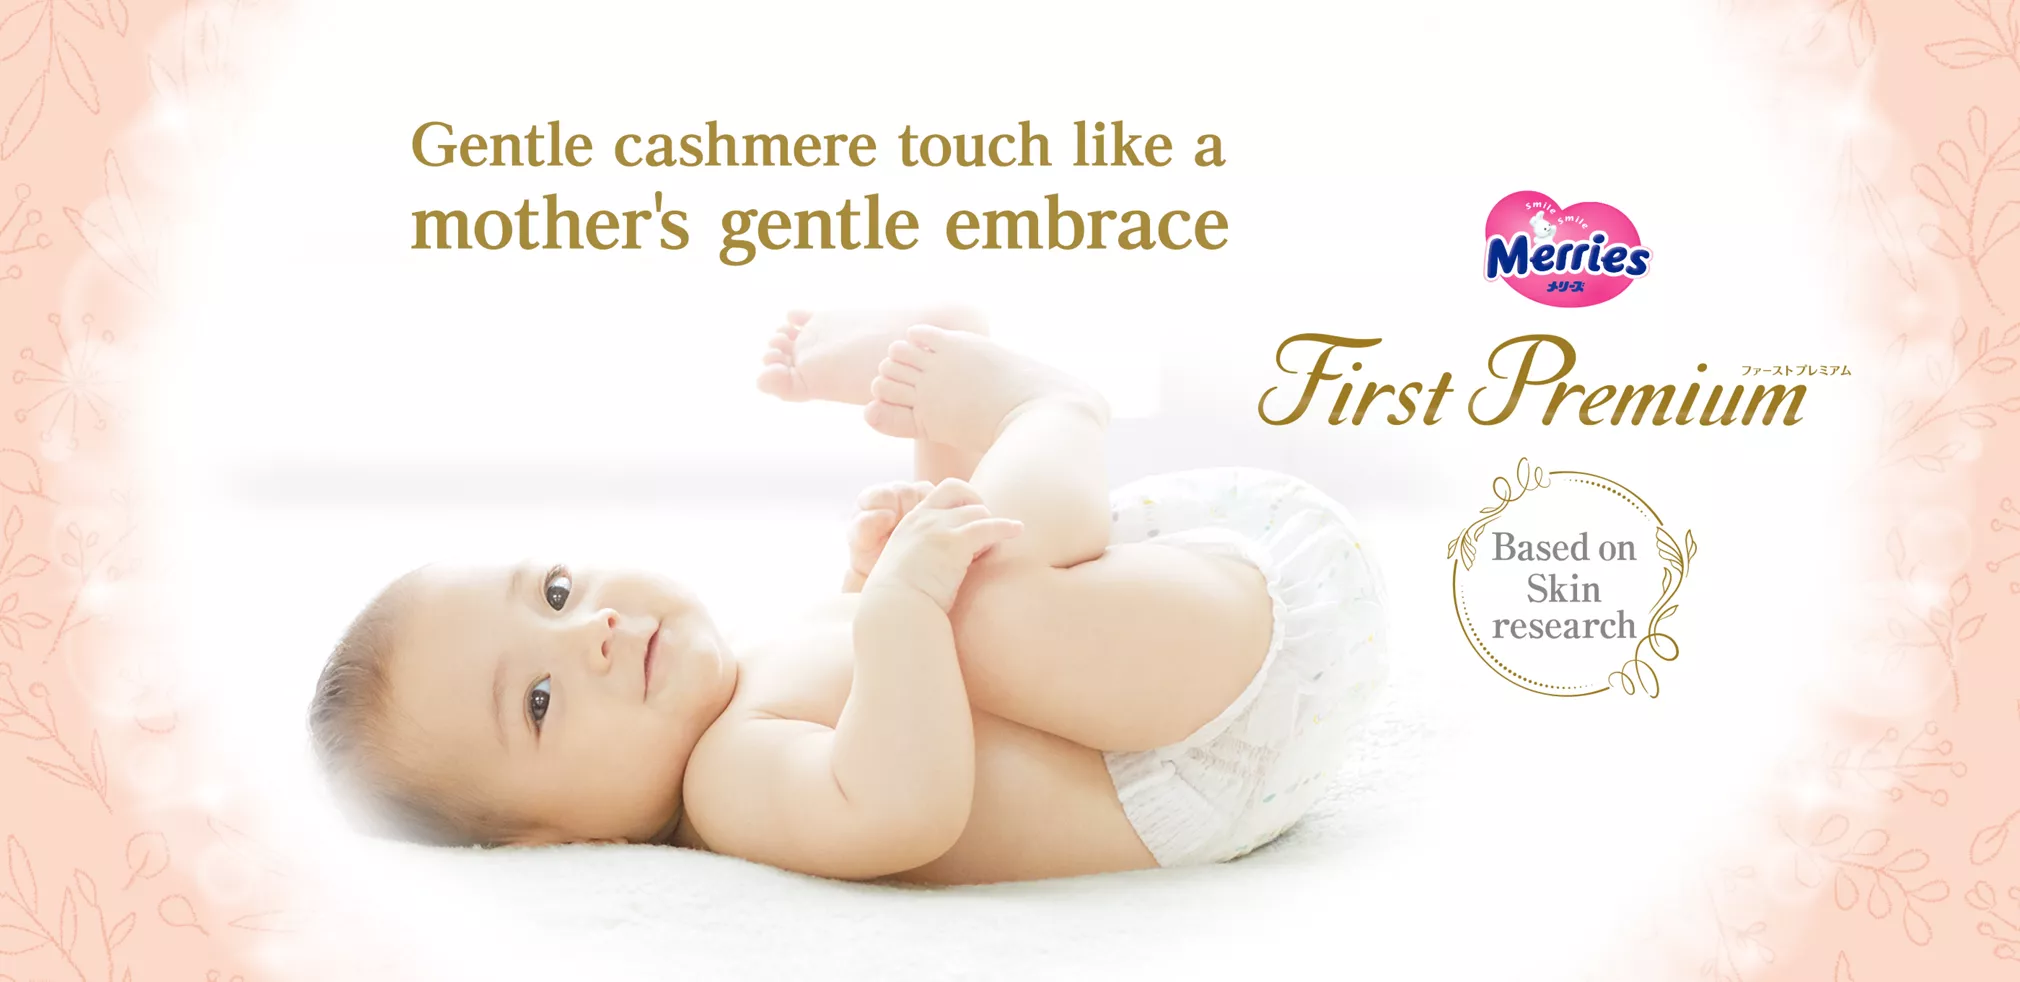 Gentle cashmere touch like a mother's gentle embrace　Merries First Premium Based on Skin research